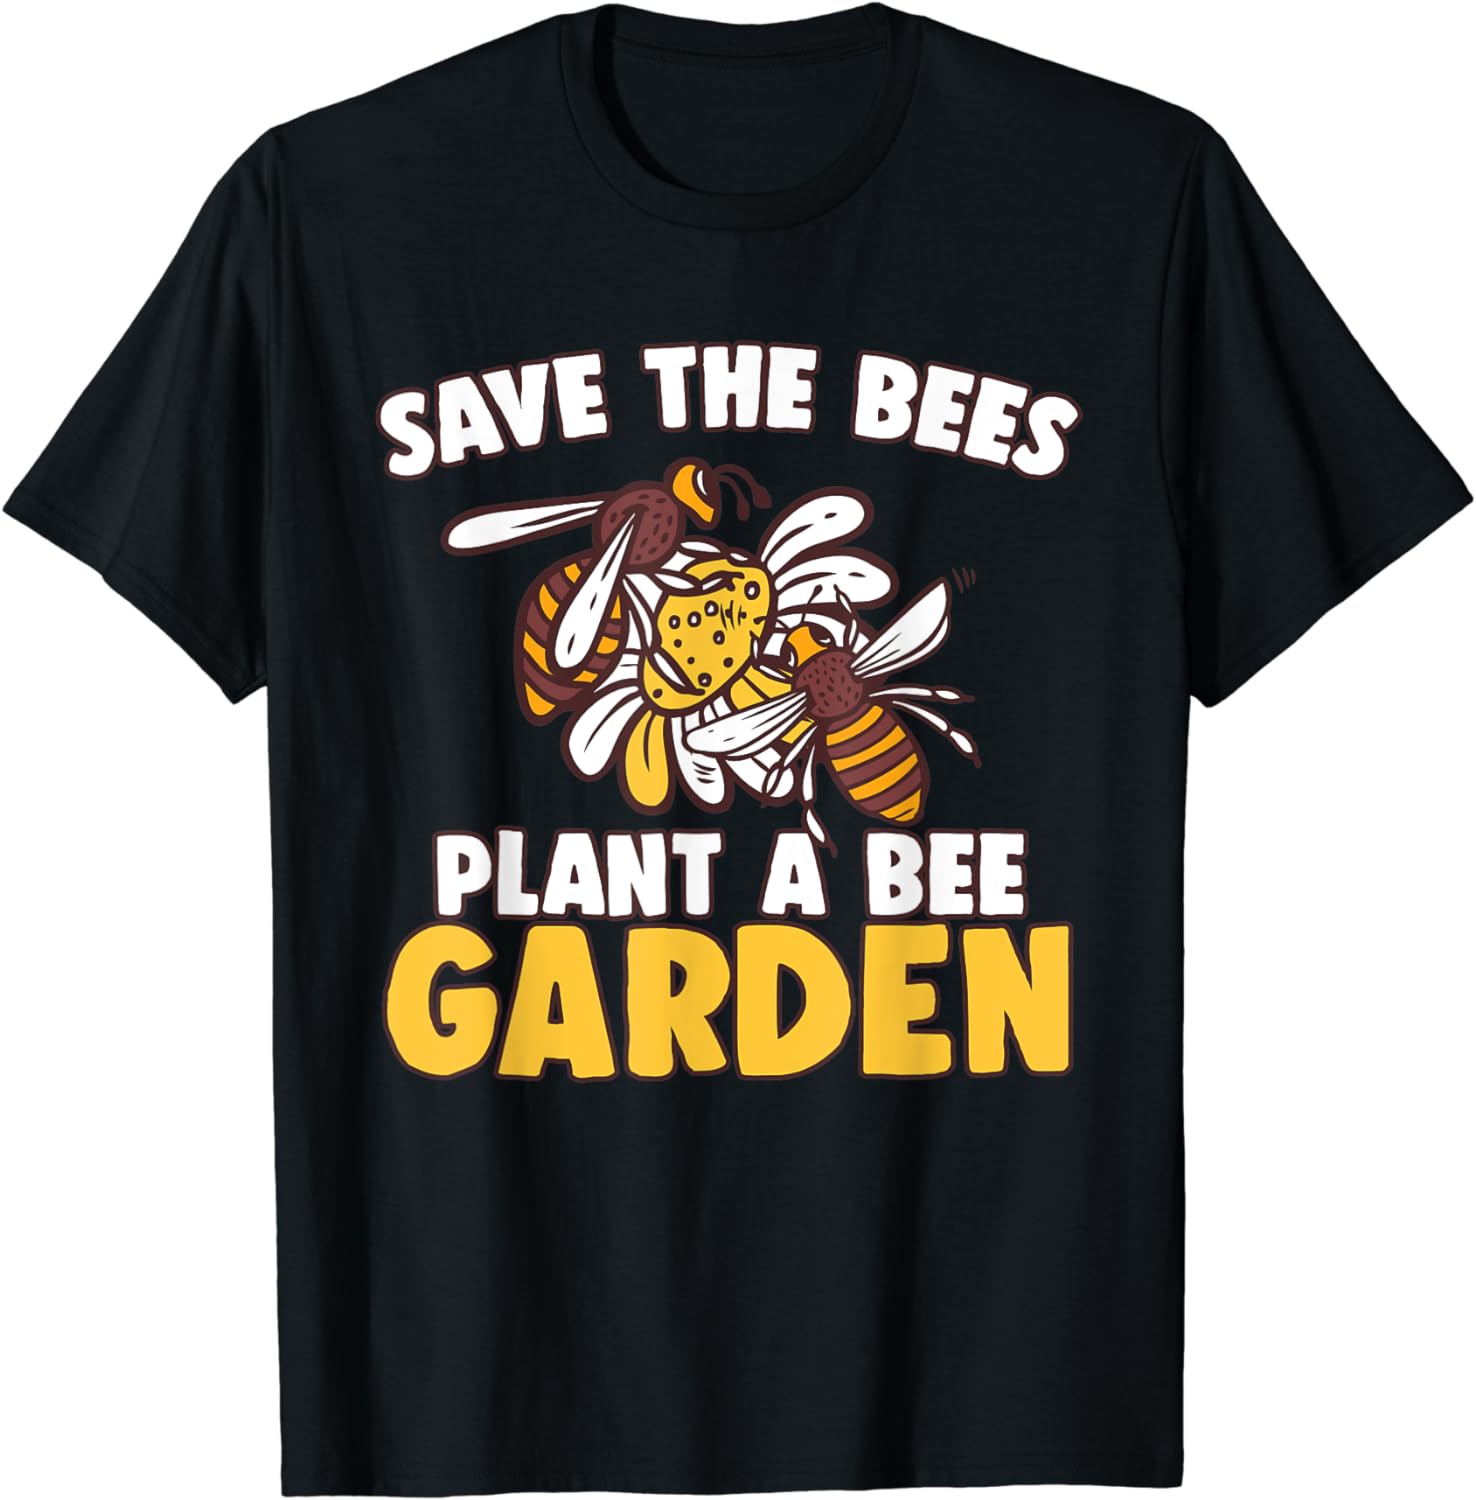 Save The Bees T Shirt Clothing